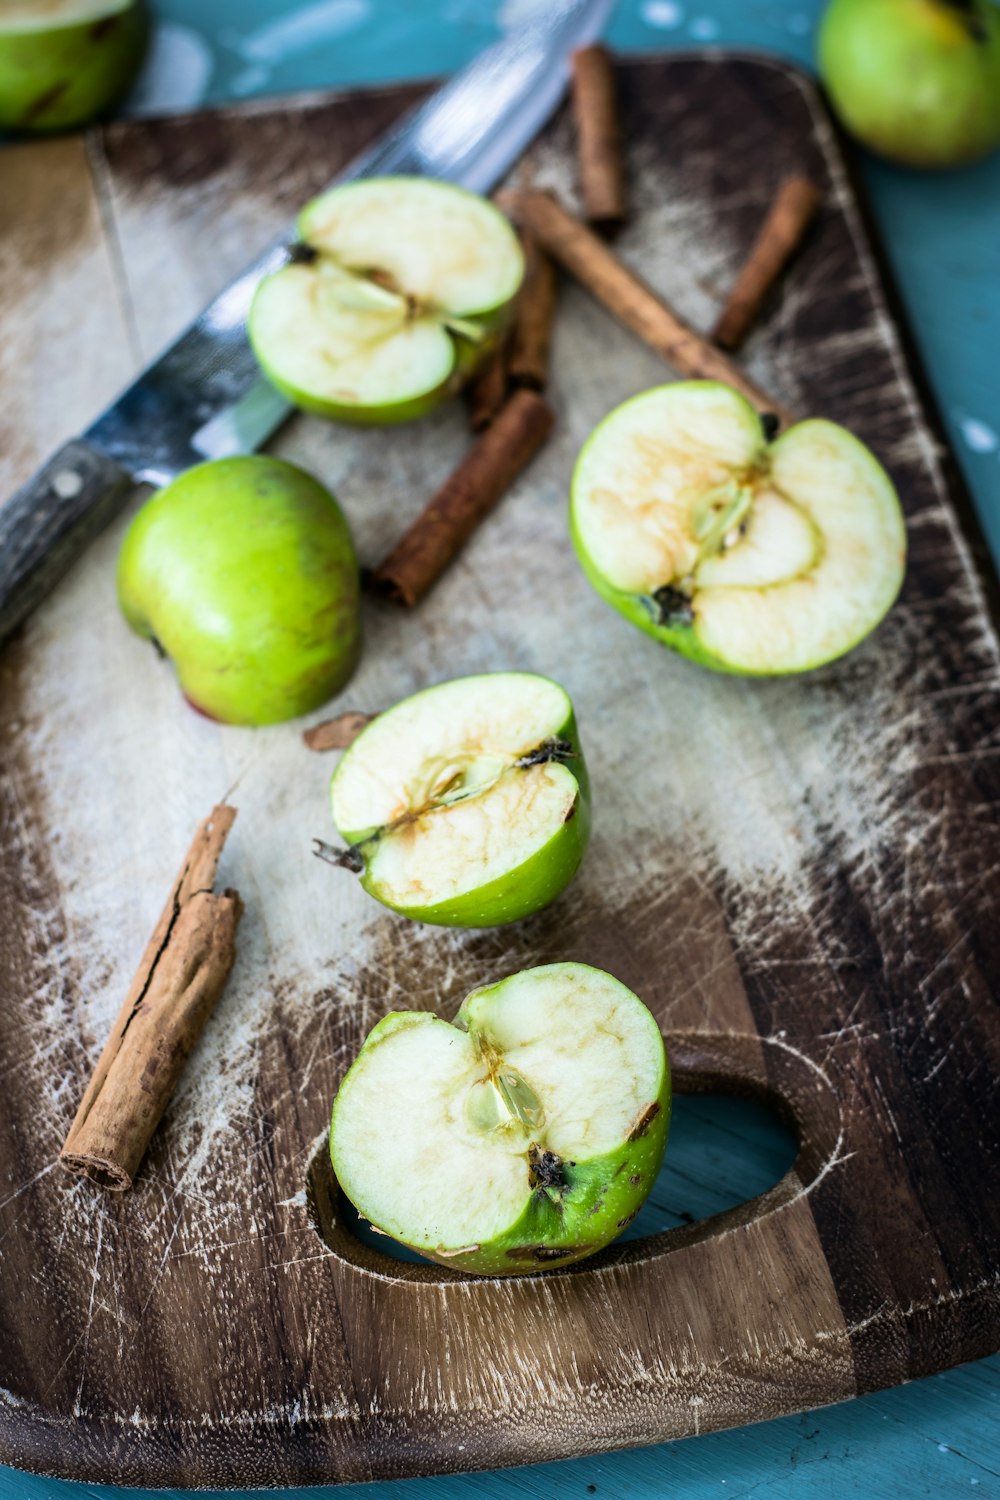 sliced green apple fruits on brown wooden table